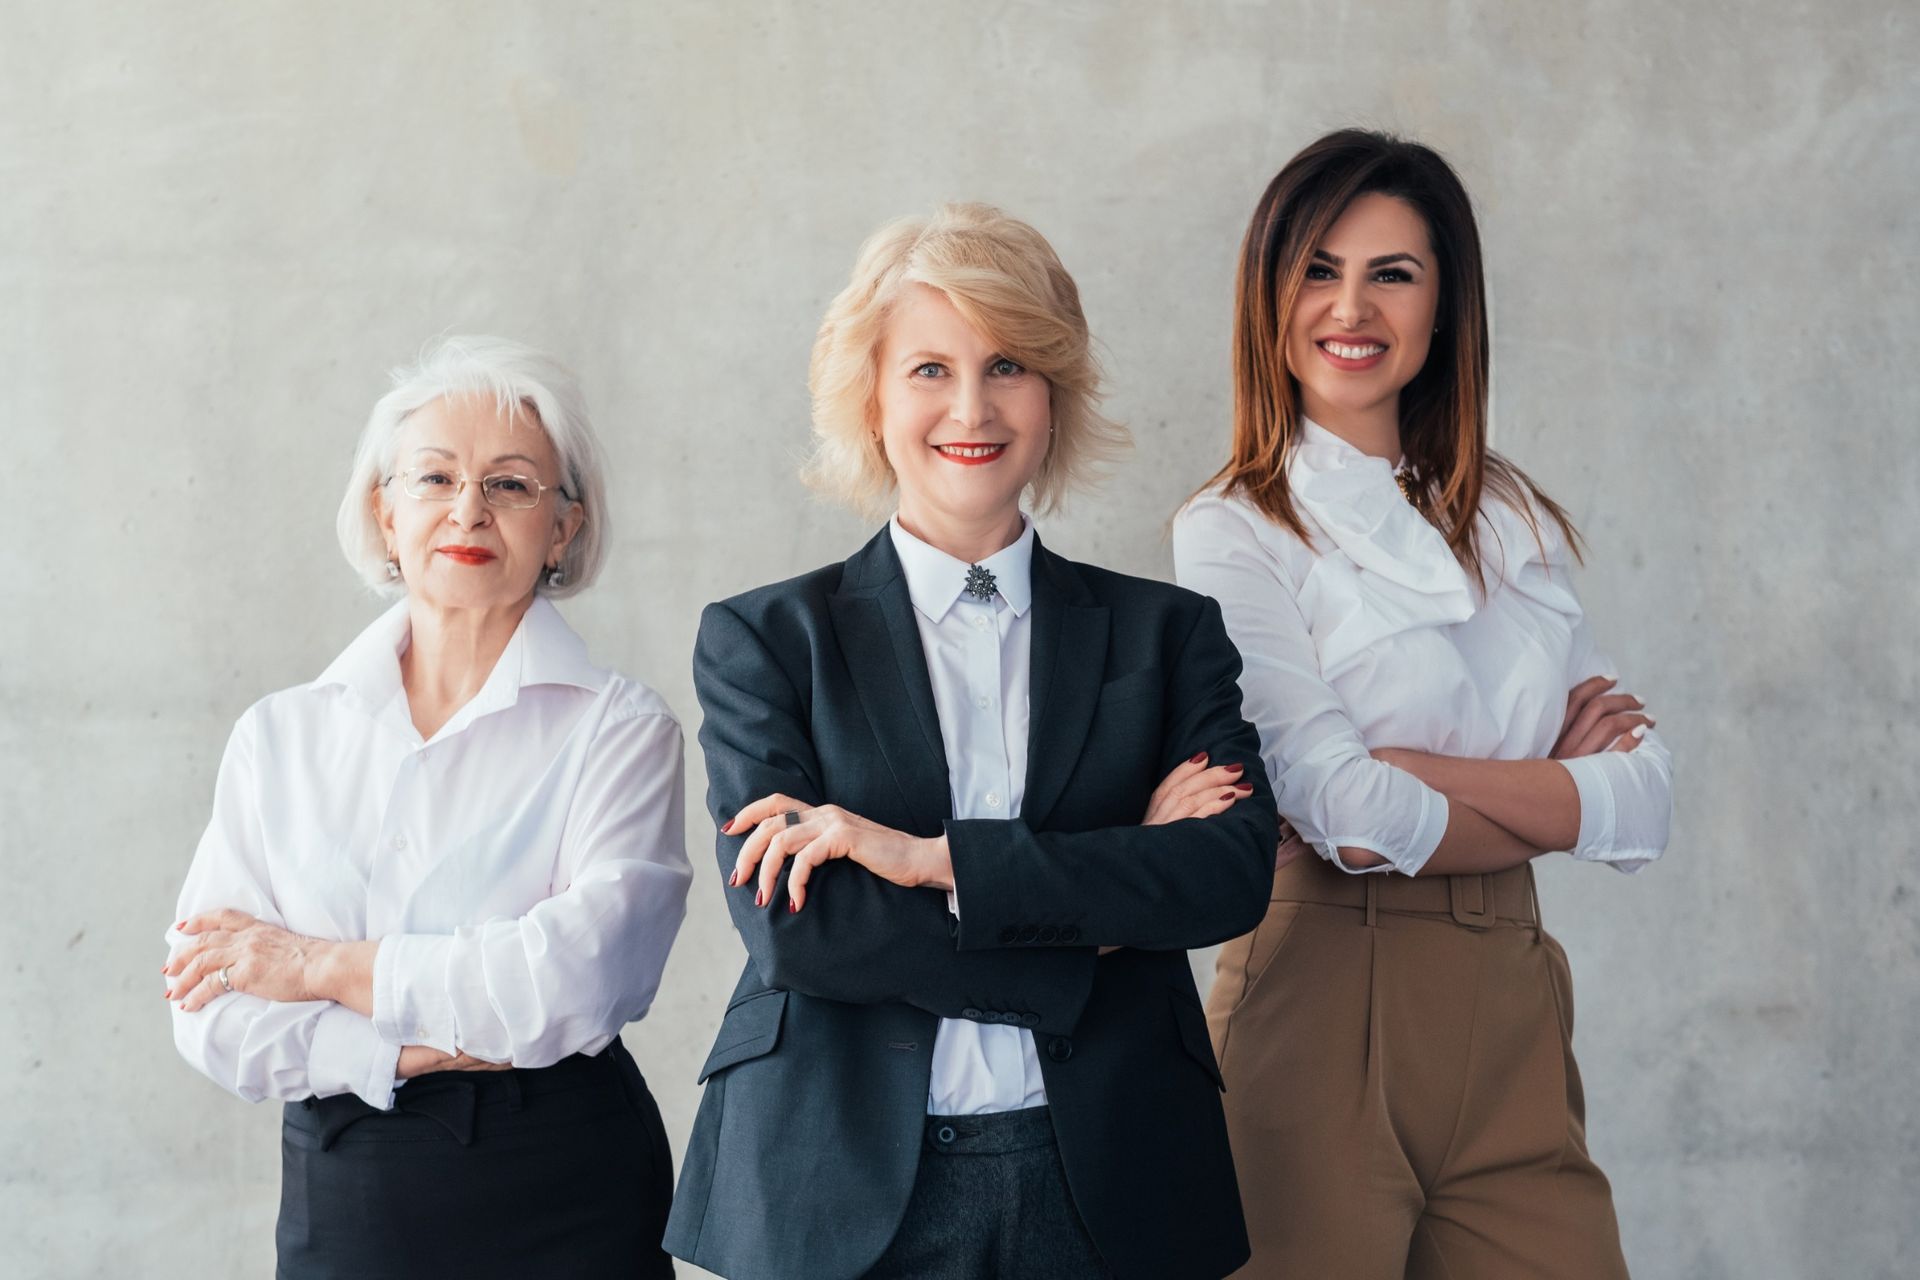 5 Reasons Why We Need More Women In Leadership Roles